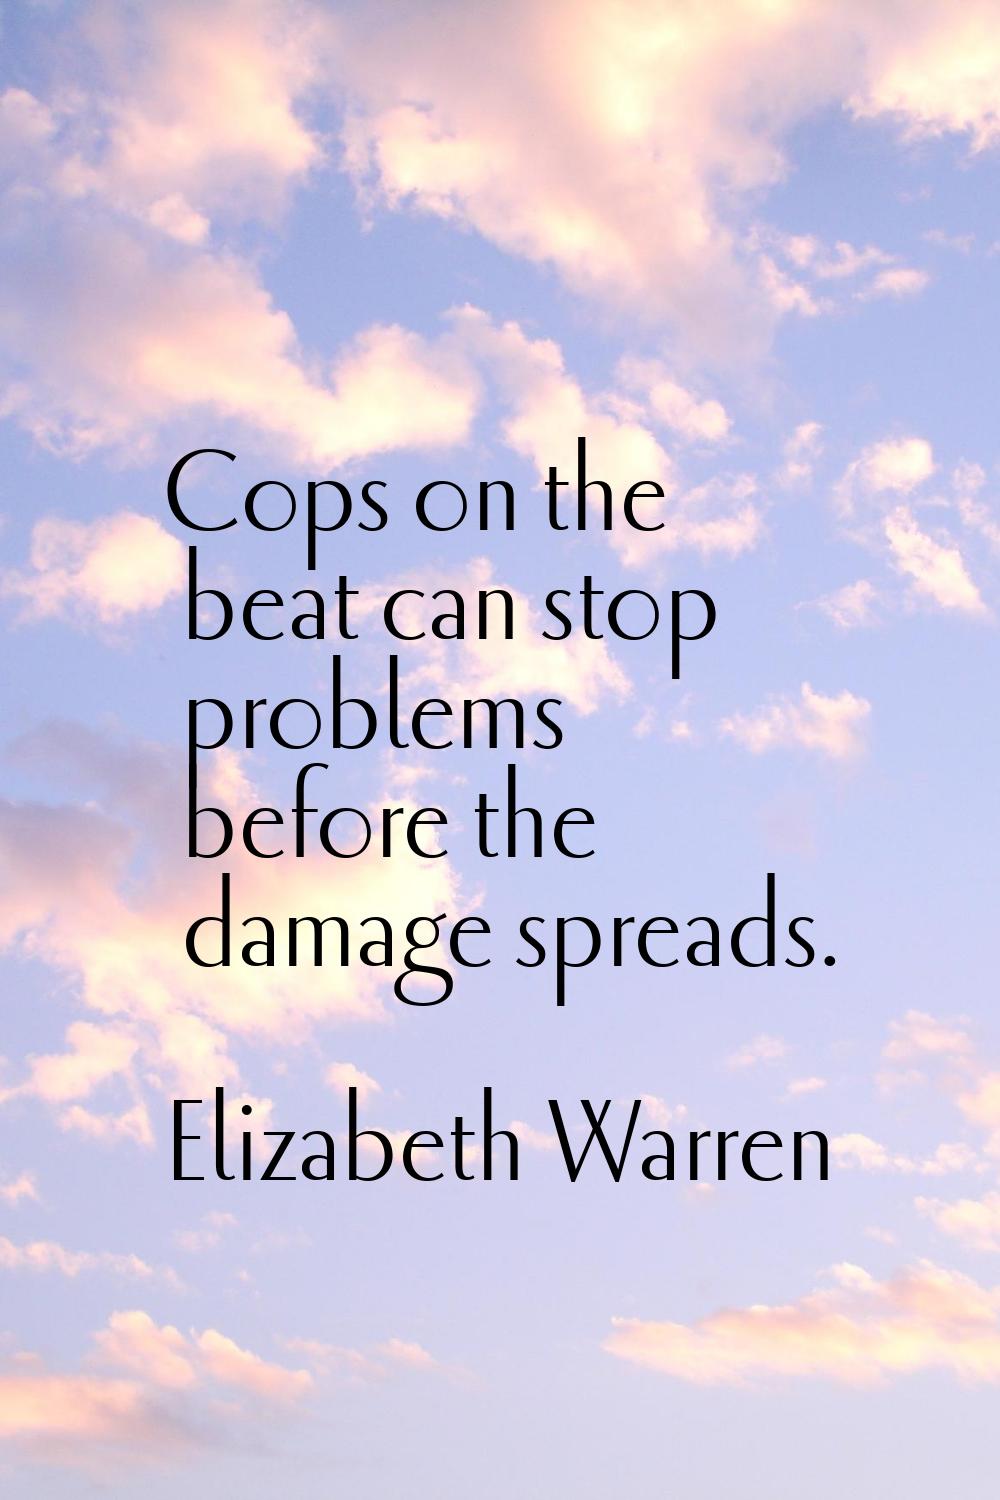 Cops on the beat can stop problems before the damage spreads.